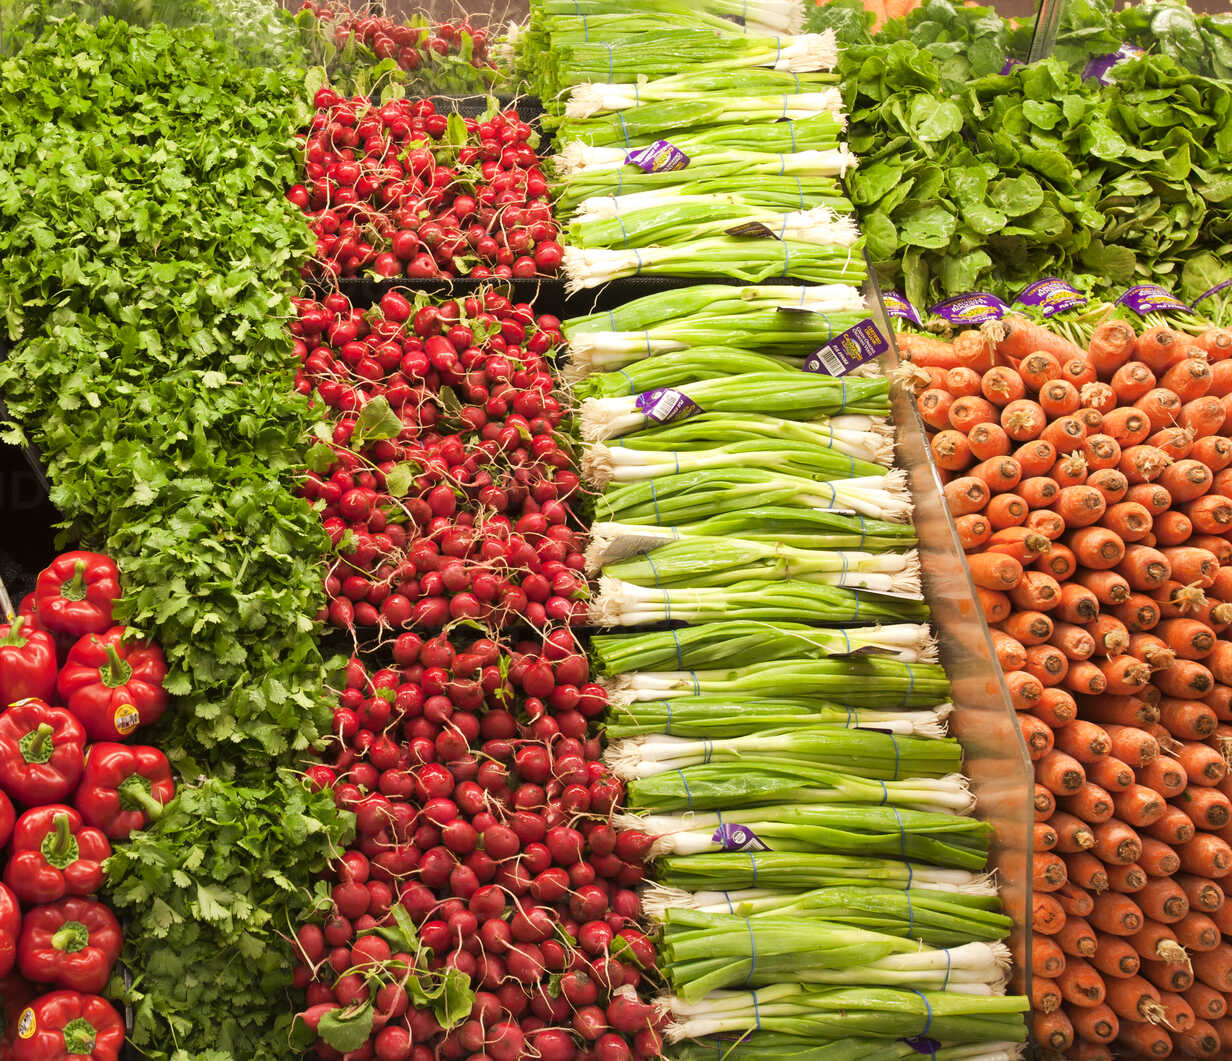 Grocery Store Produce Aisle stock photo